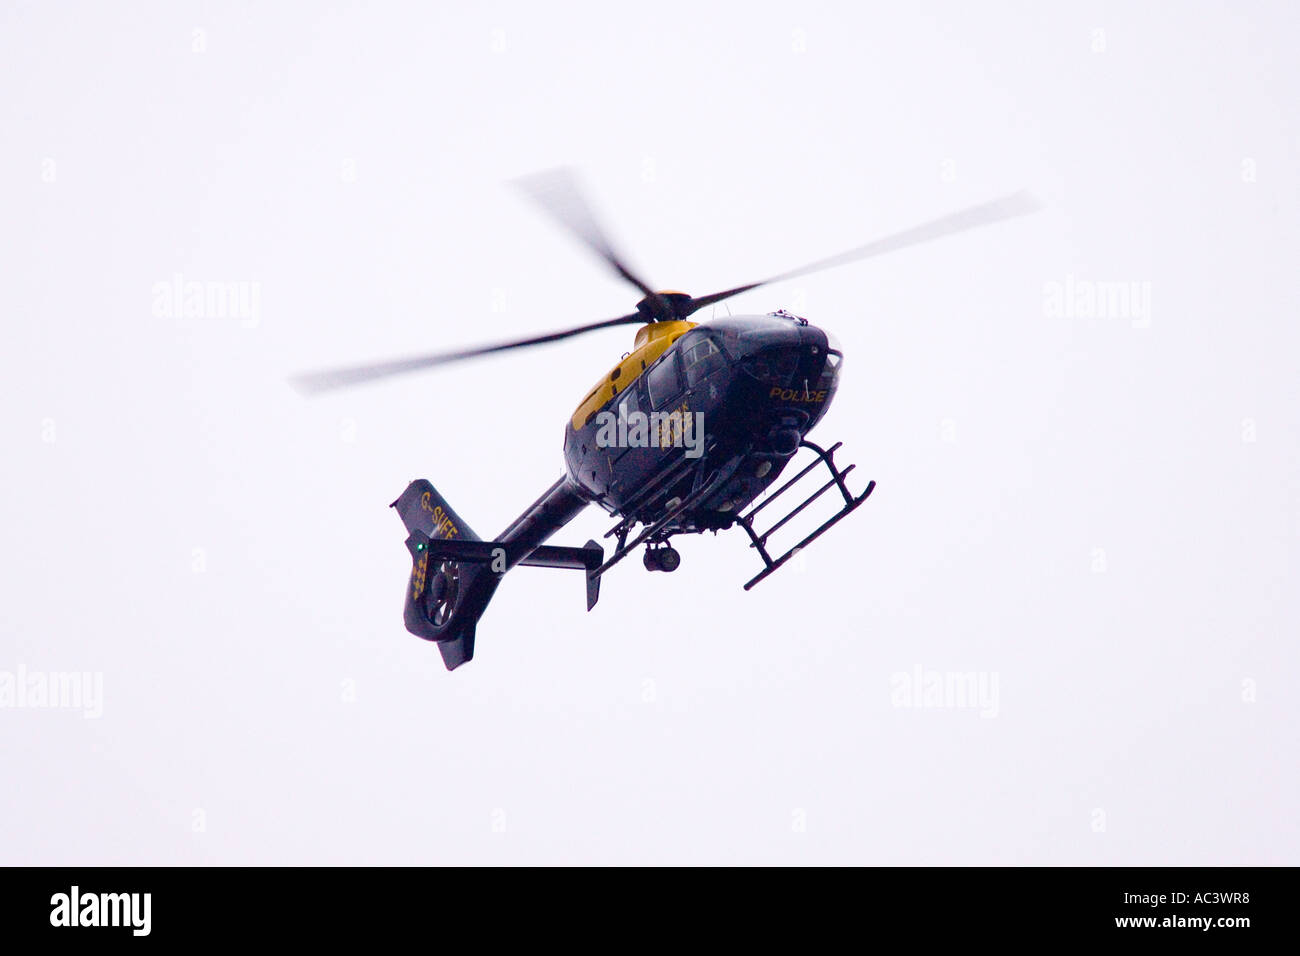 Suffolk Police helicoptor Stock Photo